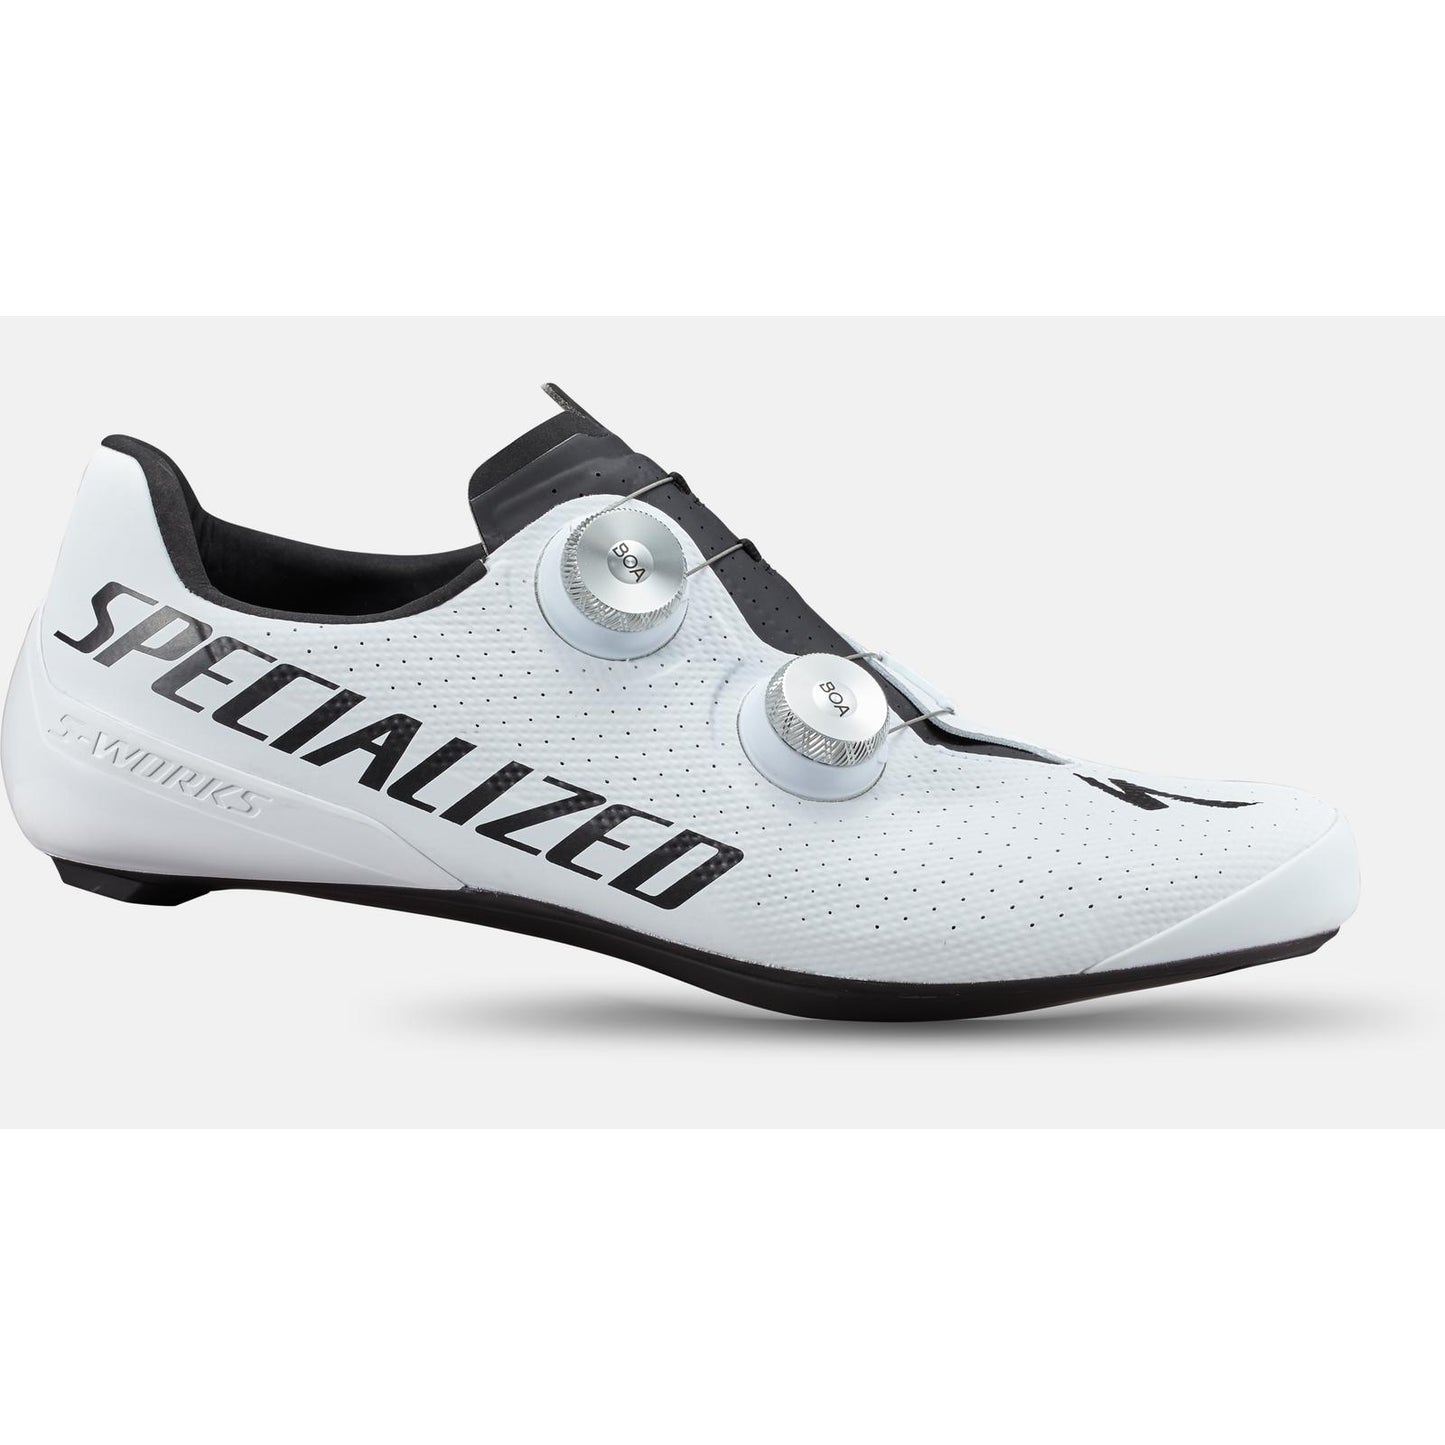 Specialized S-Works Torch - Shoes - Bicycle Warehouse